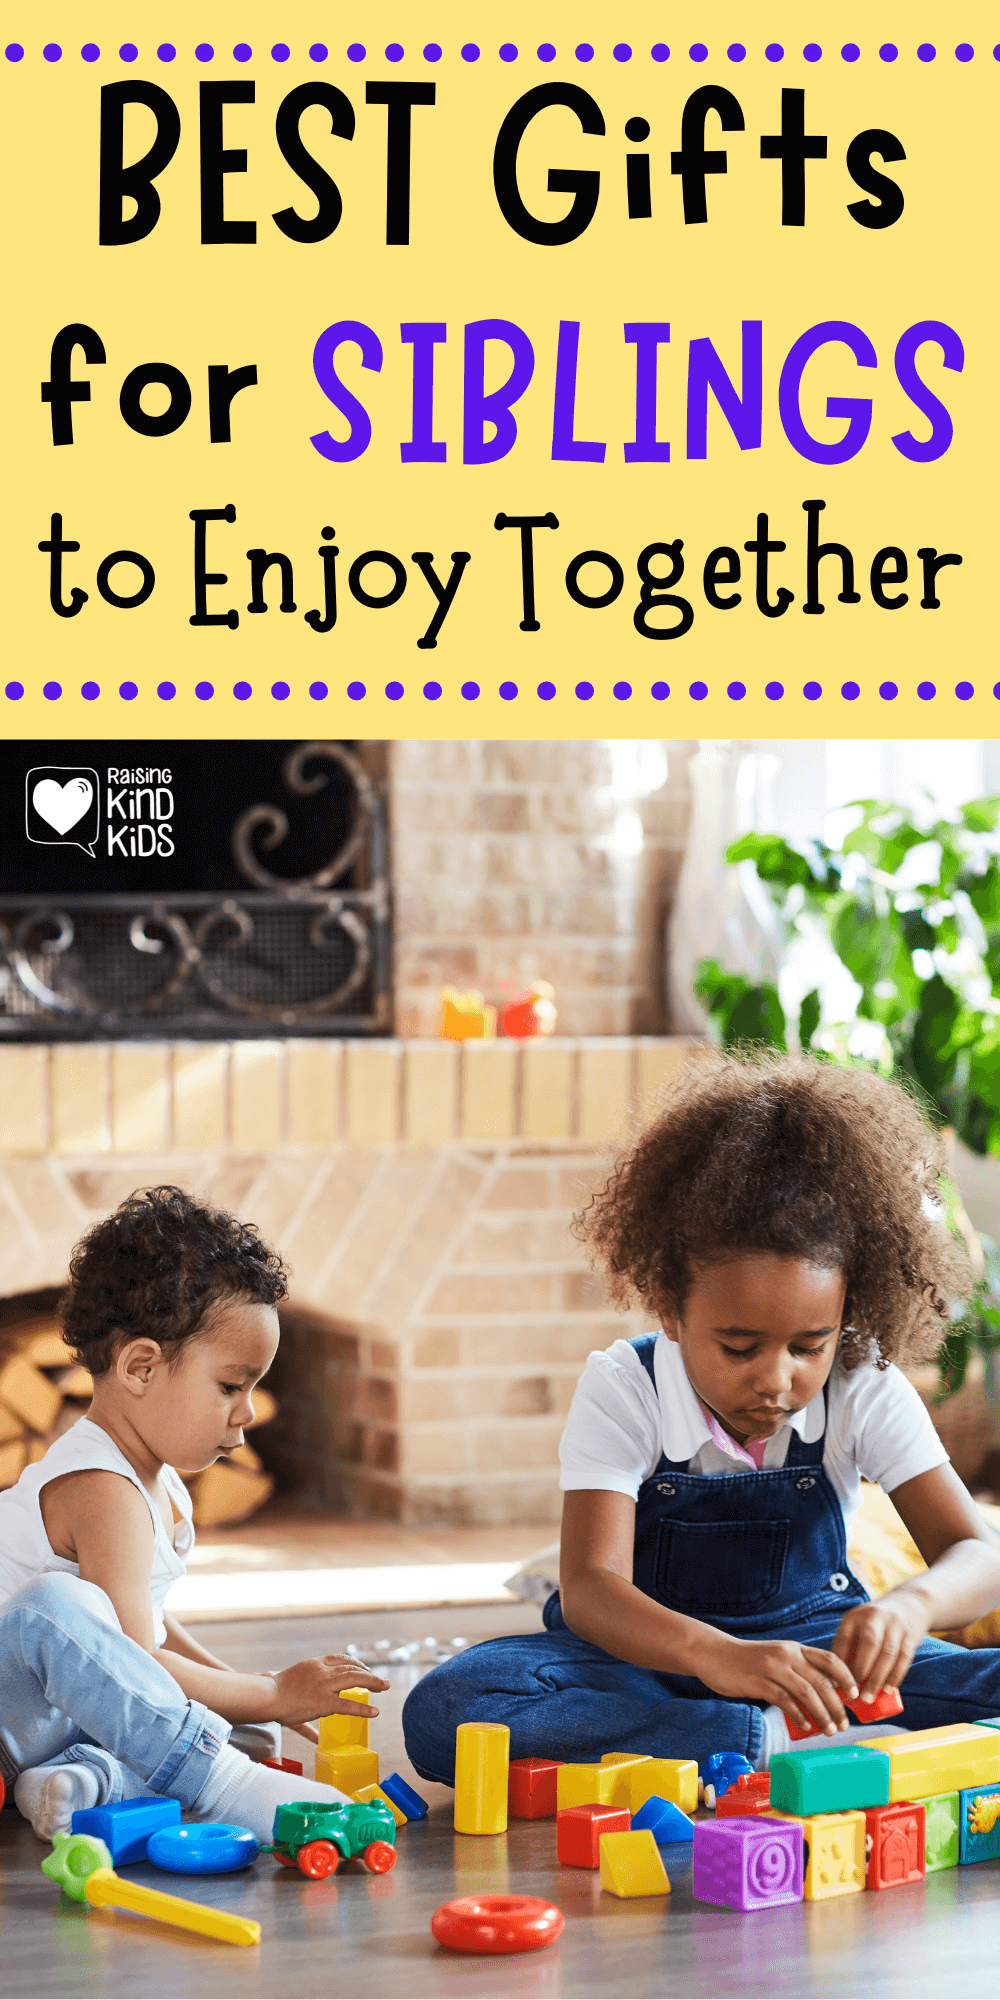 These sibling gifts are perfect for sisters and brothers to give each other or to give to them together so they spend more time together and share interest. It will help sibling relationships build stronger connections.